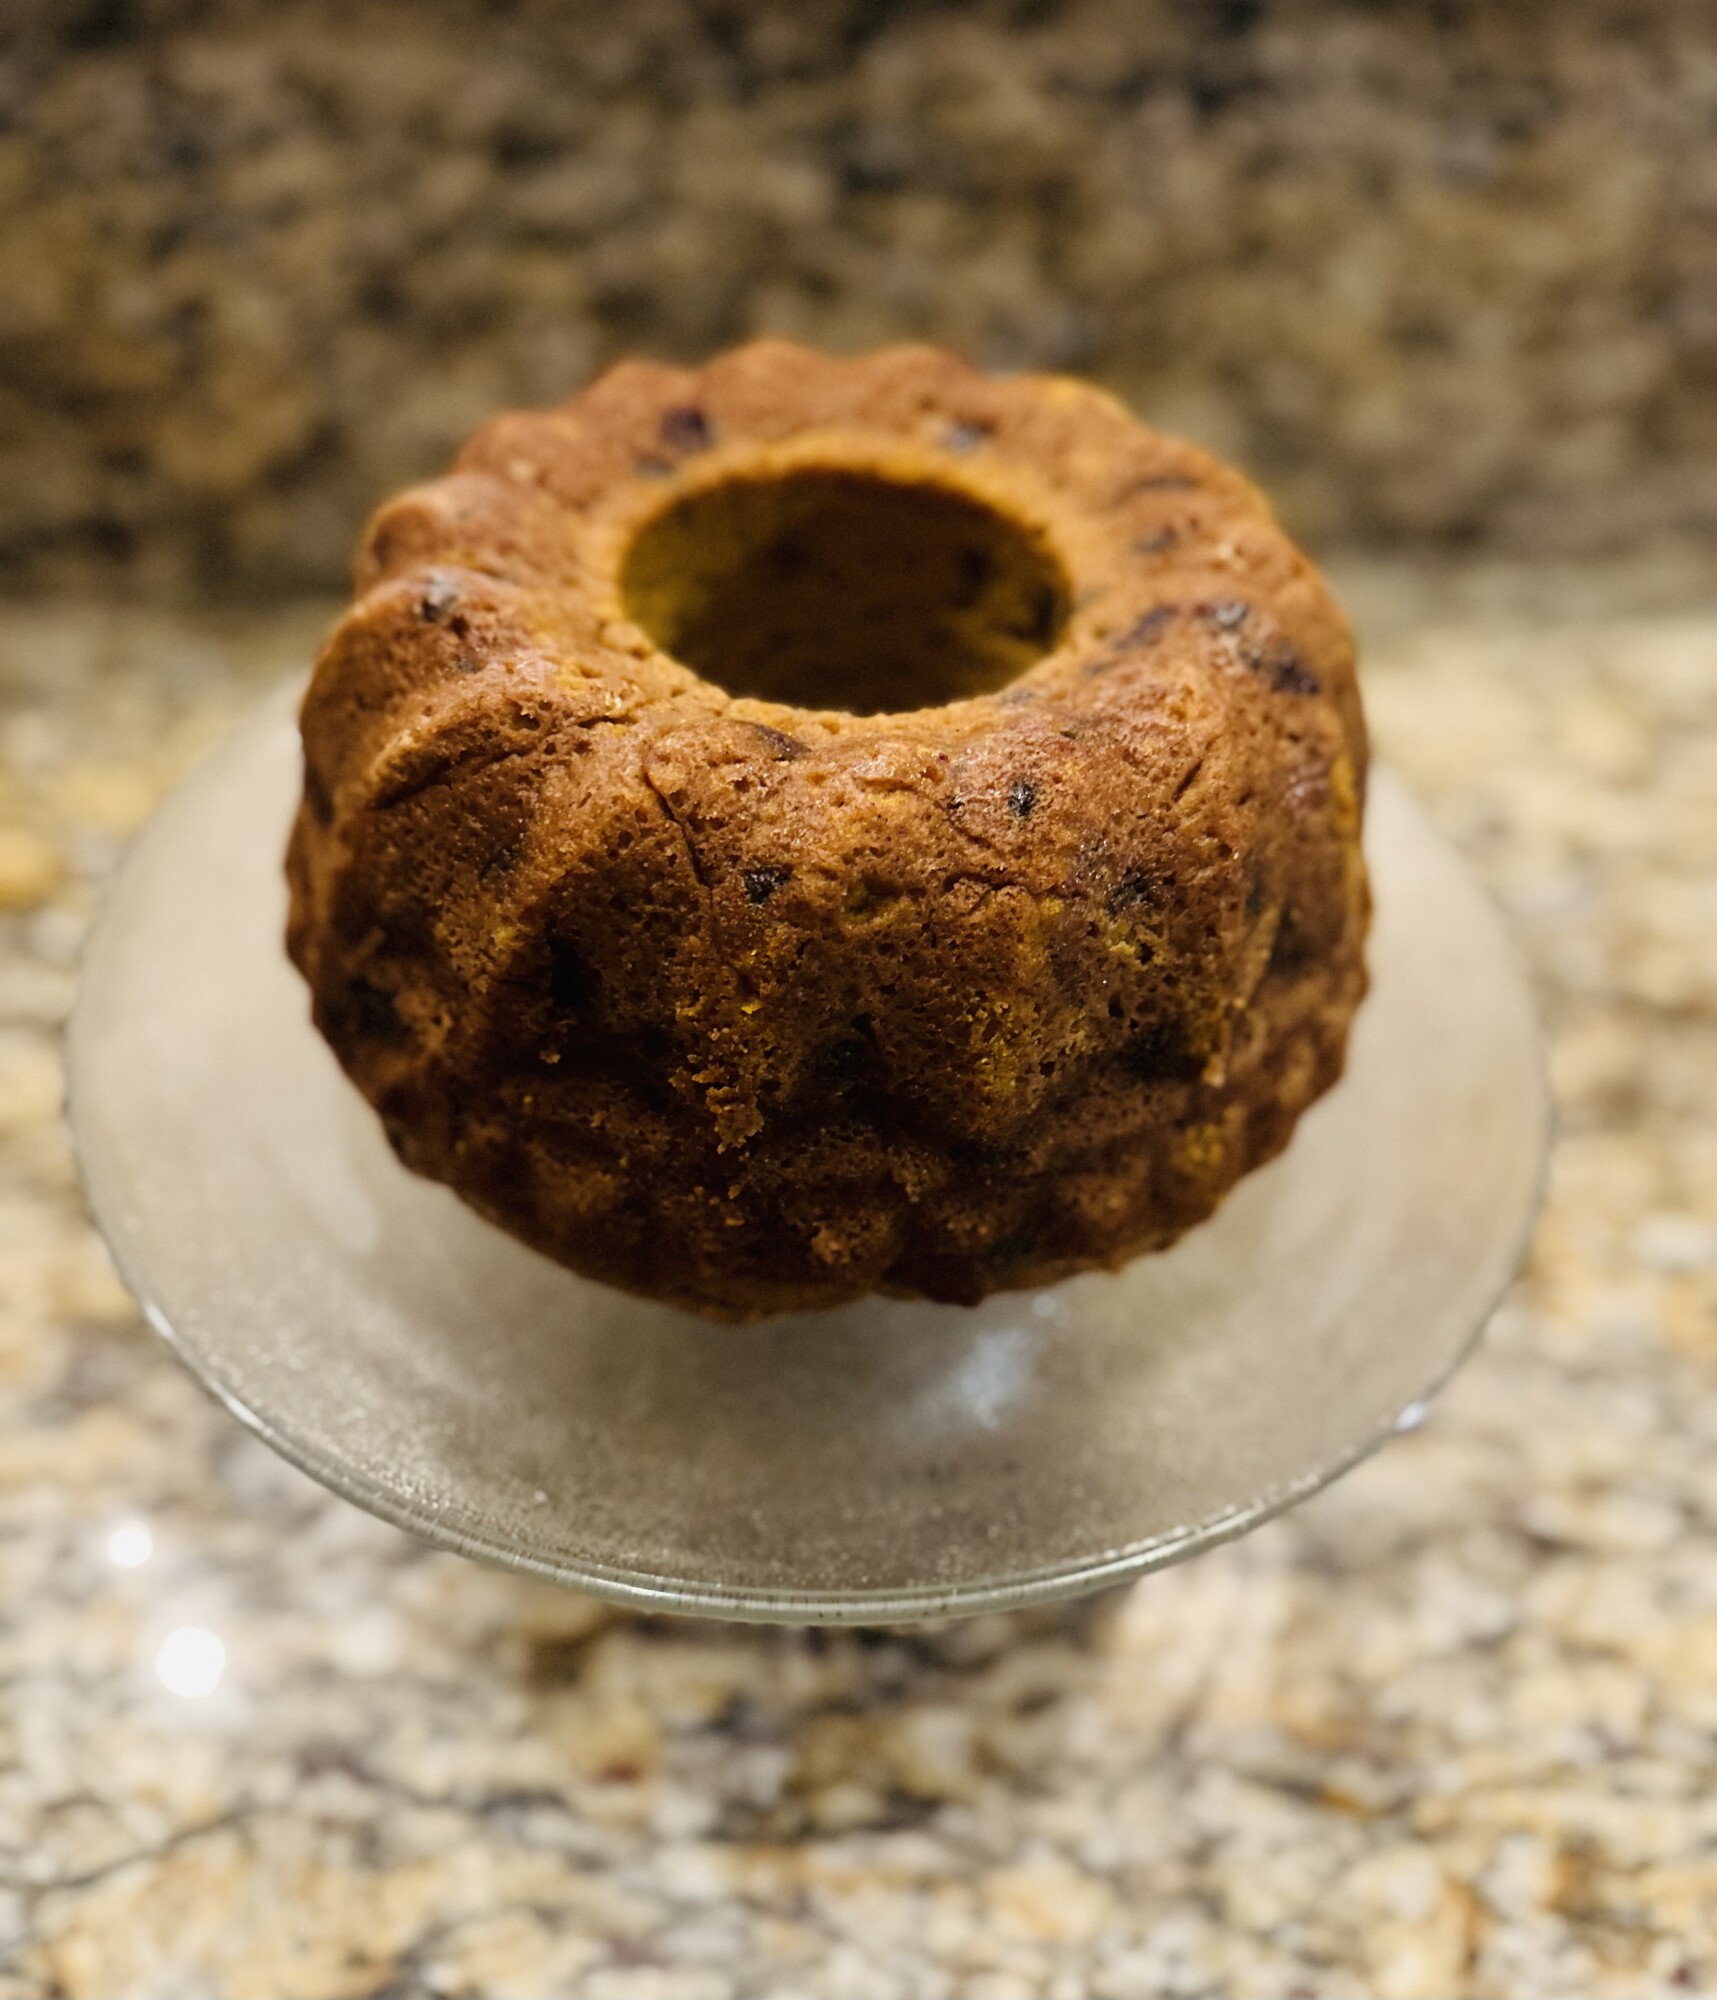 Indulge in the perfect autumn treat with our irresistible Pumpkin Spice Bundt Cake Recipe. This moist and flavorful cake is the ultimate combination of warm pumpkin spice and rich chocolate. The addition of chocolate chips adds a touch of decadence that will satisfy even the most discerning sweet tooth.